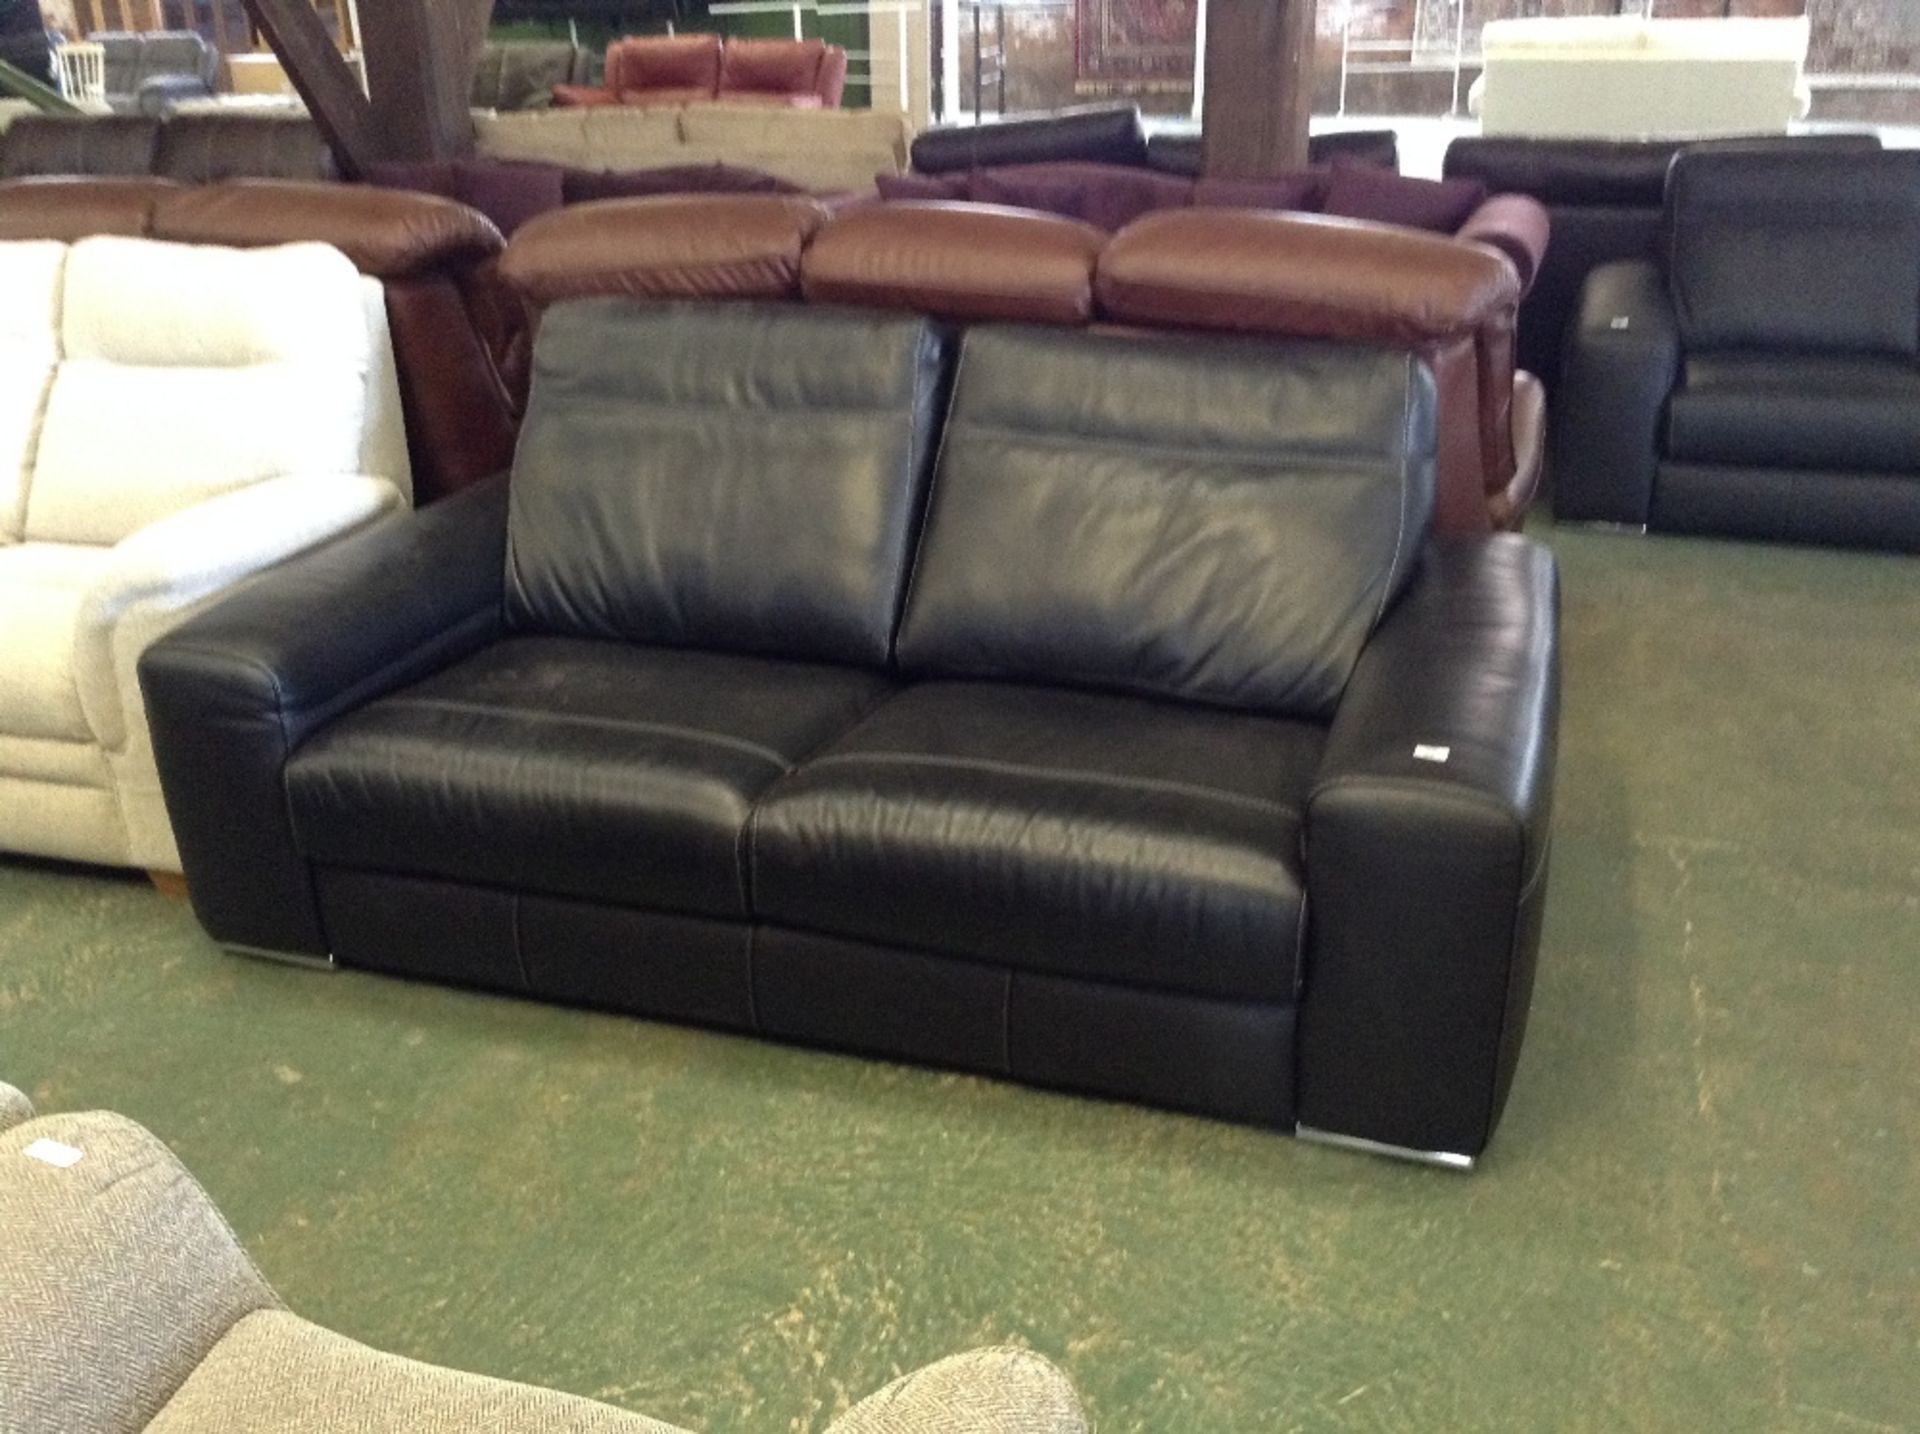 BLACK LEATHER WITH WHITE STITCH 2 SEATER SOFA